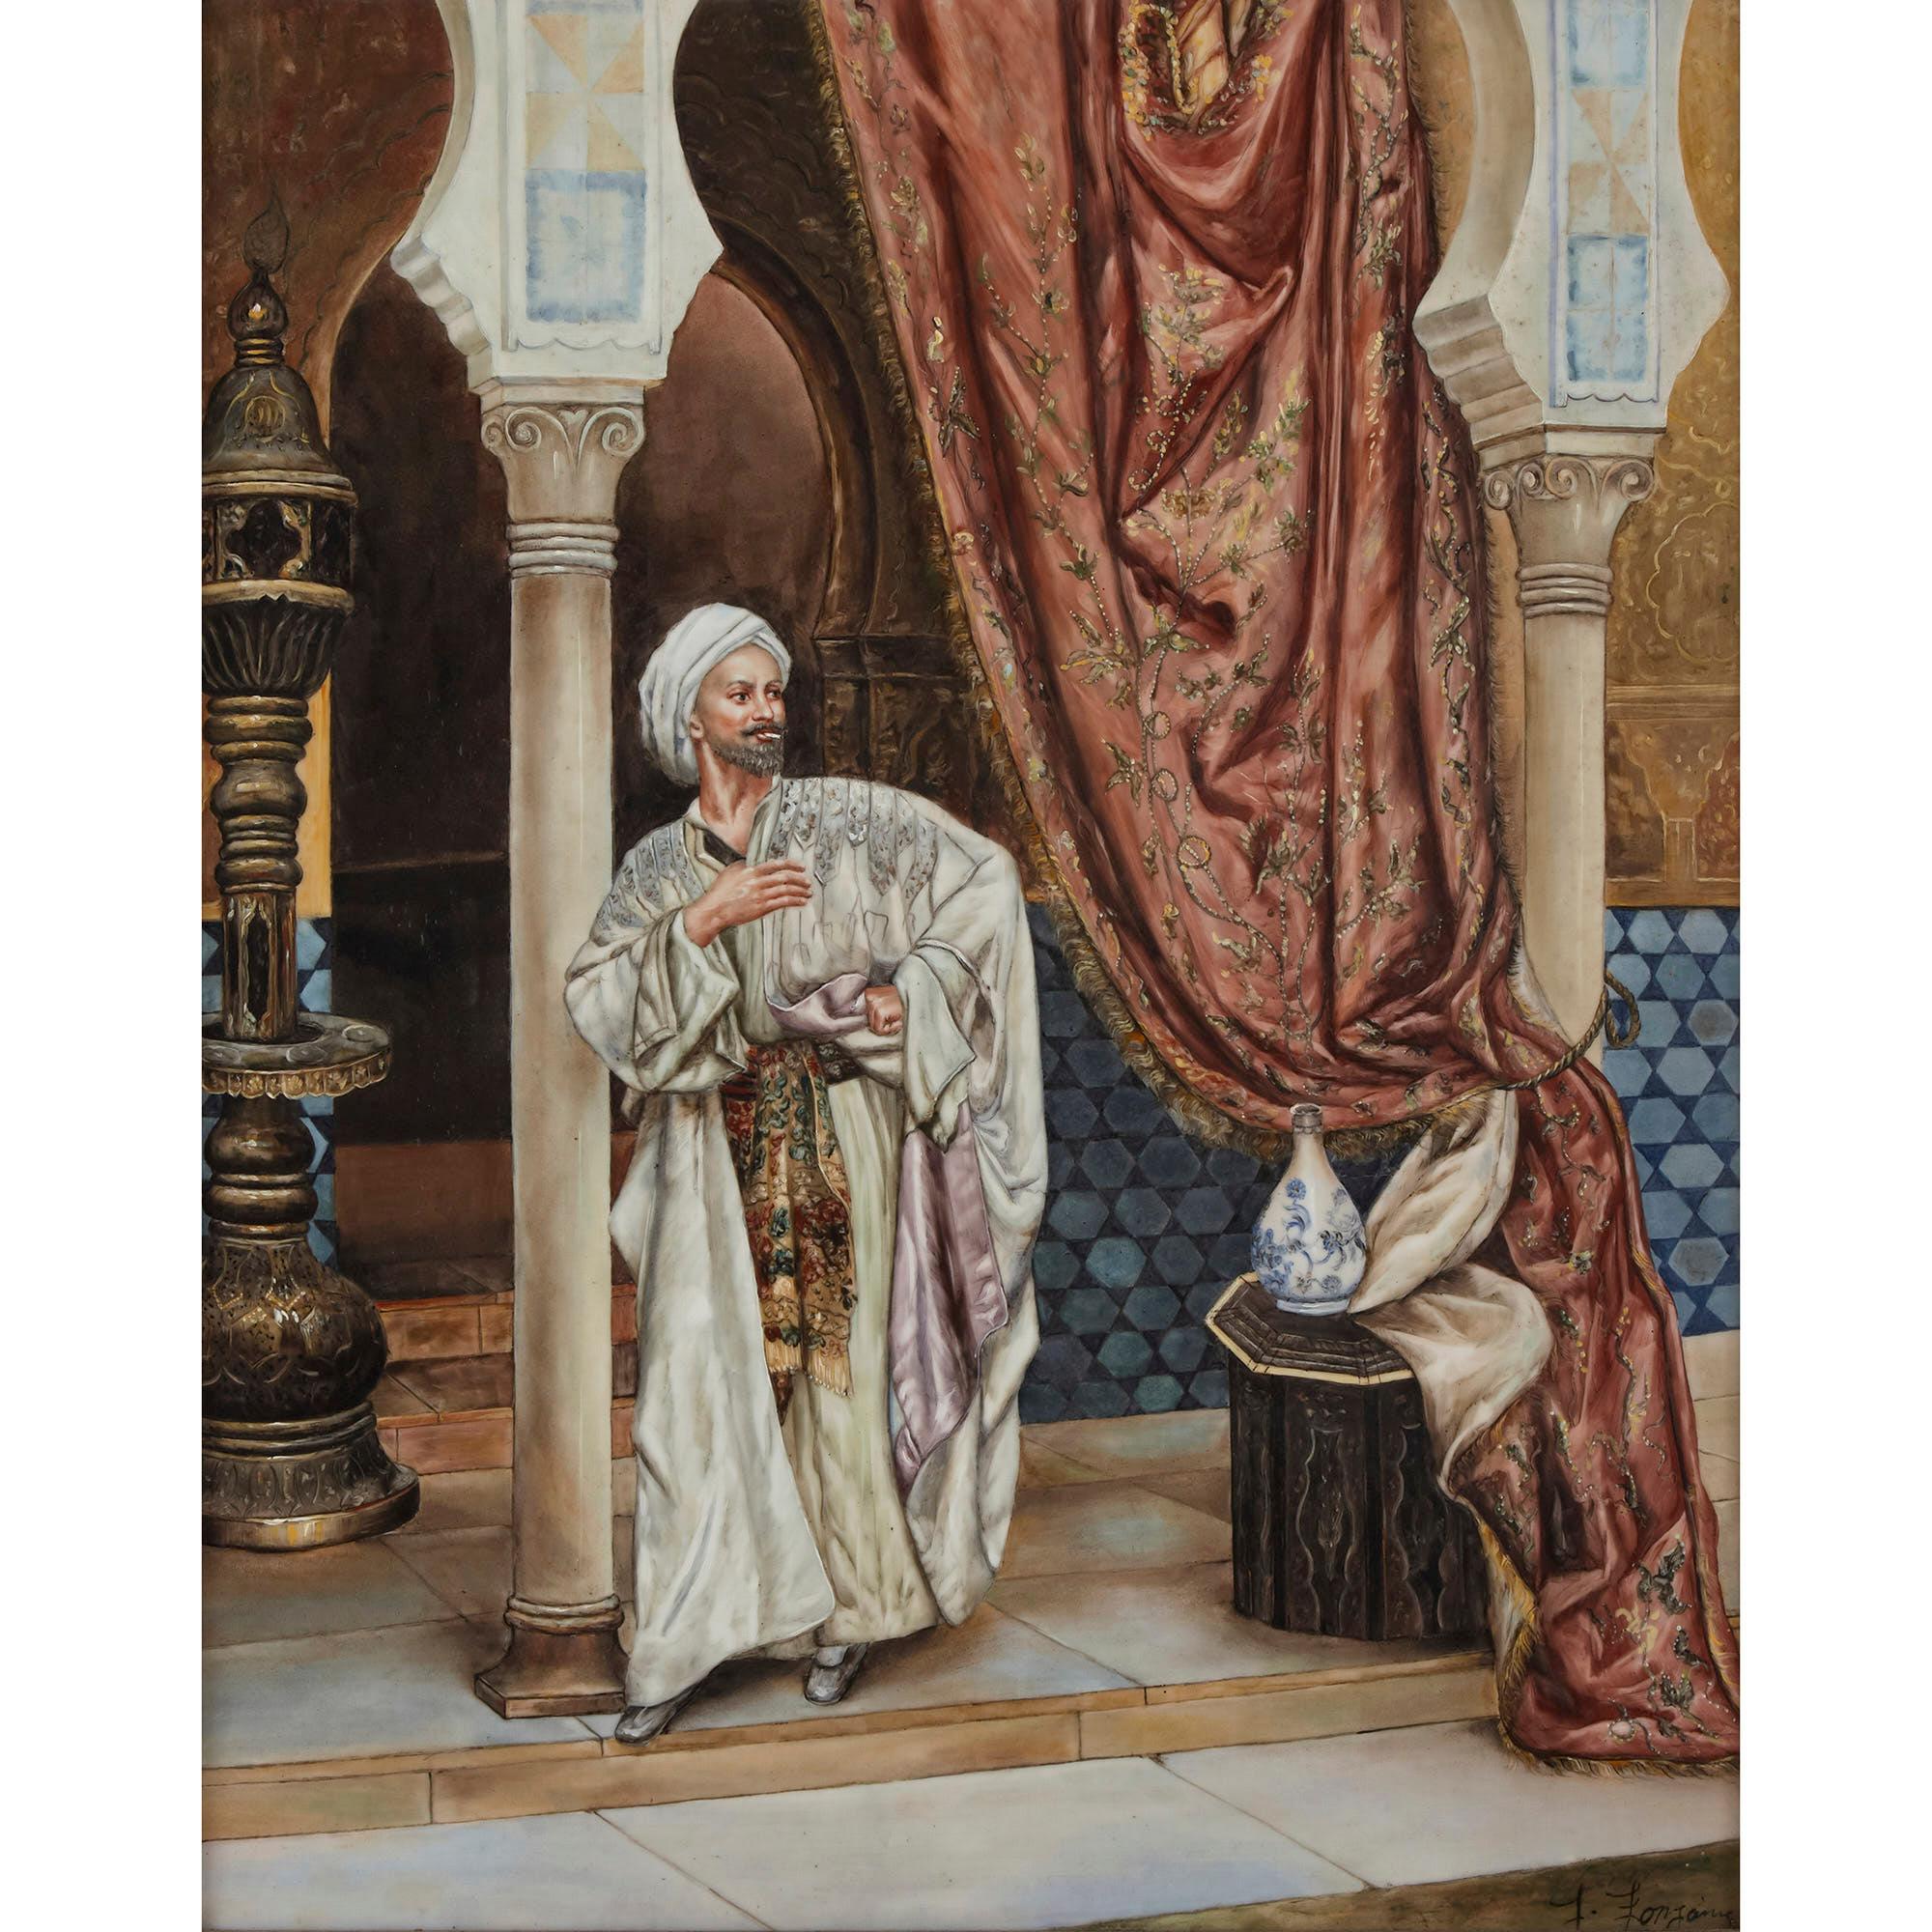 Orientalist porcelain plaque in the style of KPM
German, 20th century
Measures: Frame: Height 64cm, width 53cm, depth 4cm
Plaque: Height 54cm, width 43cm, depth 0.5cm

This fine and exceptionally large porcelain plaque is painted with a scene